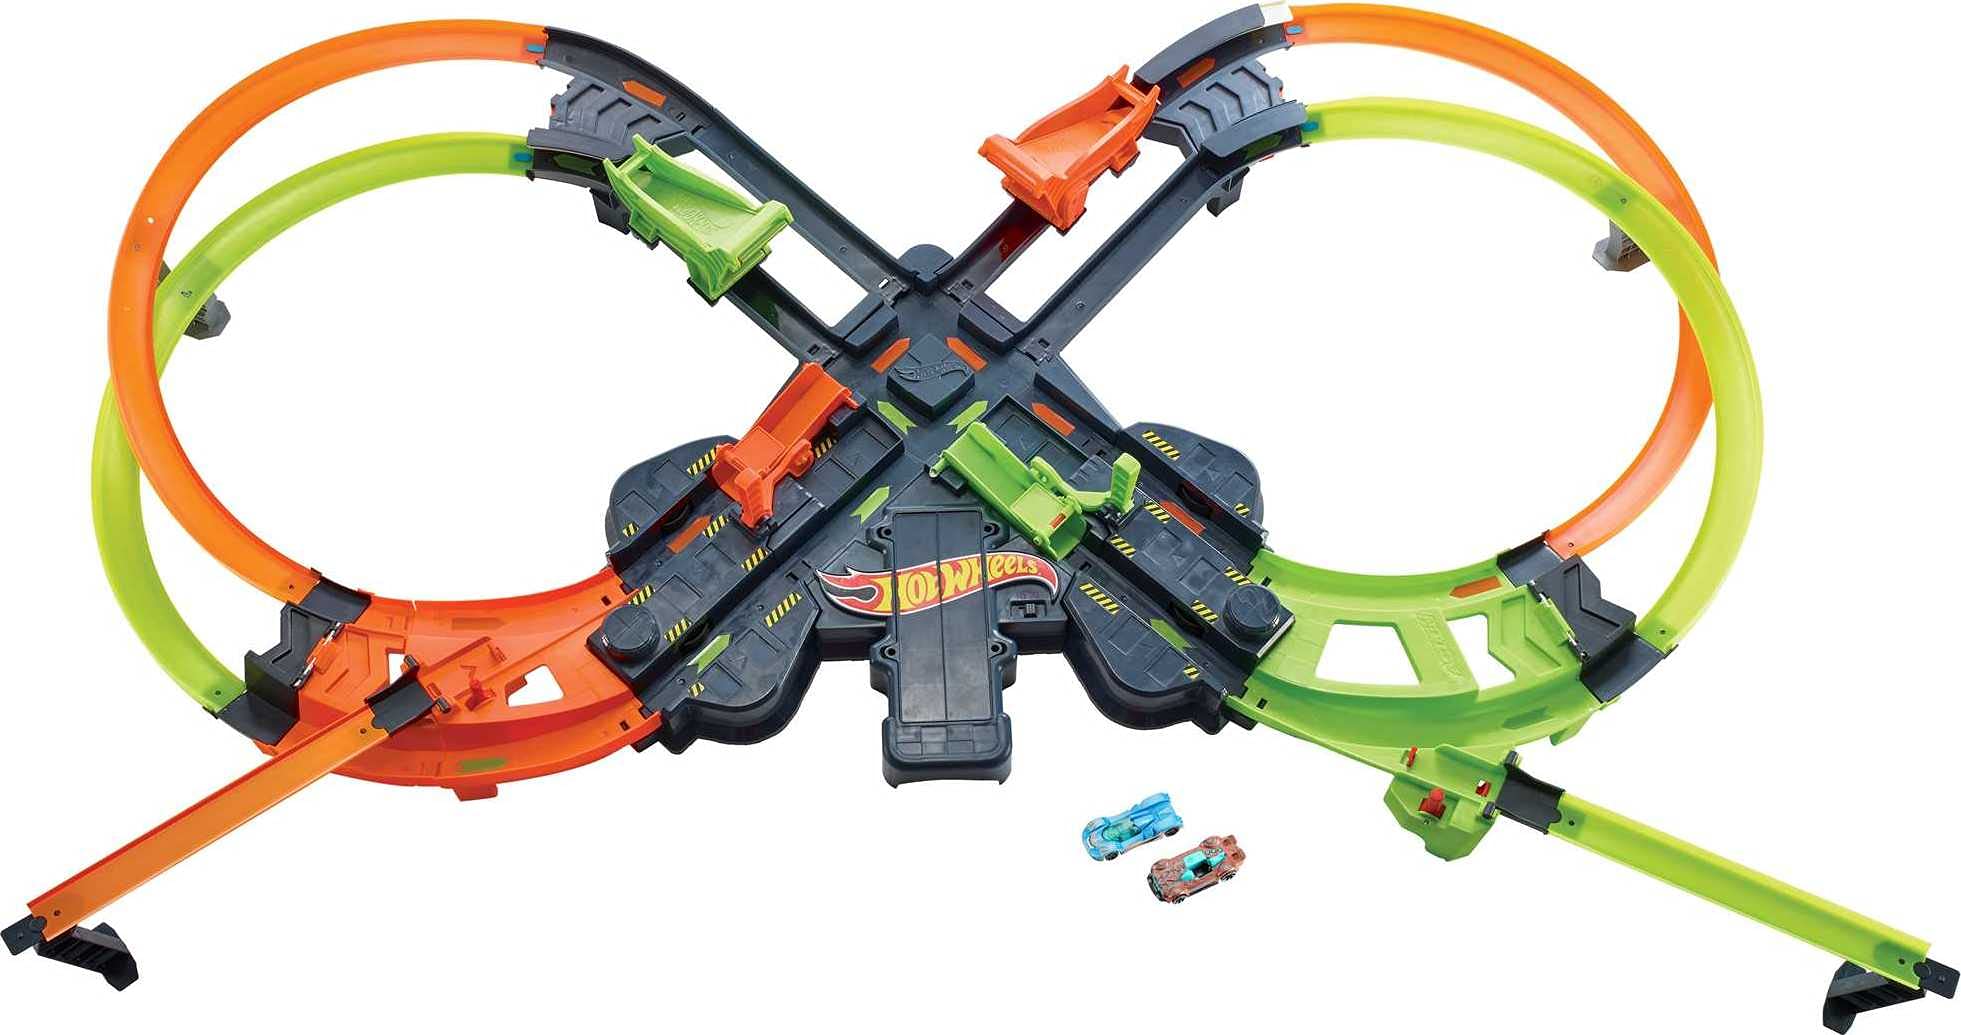 Hot Wheels colossal crash Track Set Figure 8 Track Set competitive Play Aerial Stunts Toys for Boys Age 5 and Up